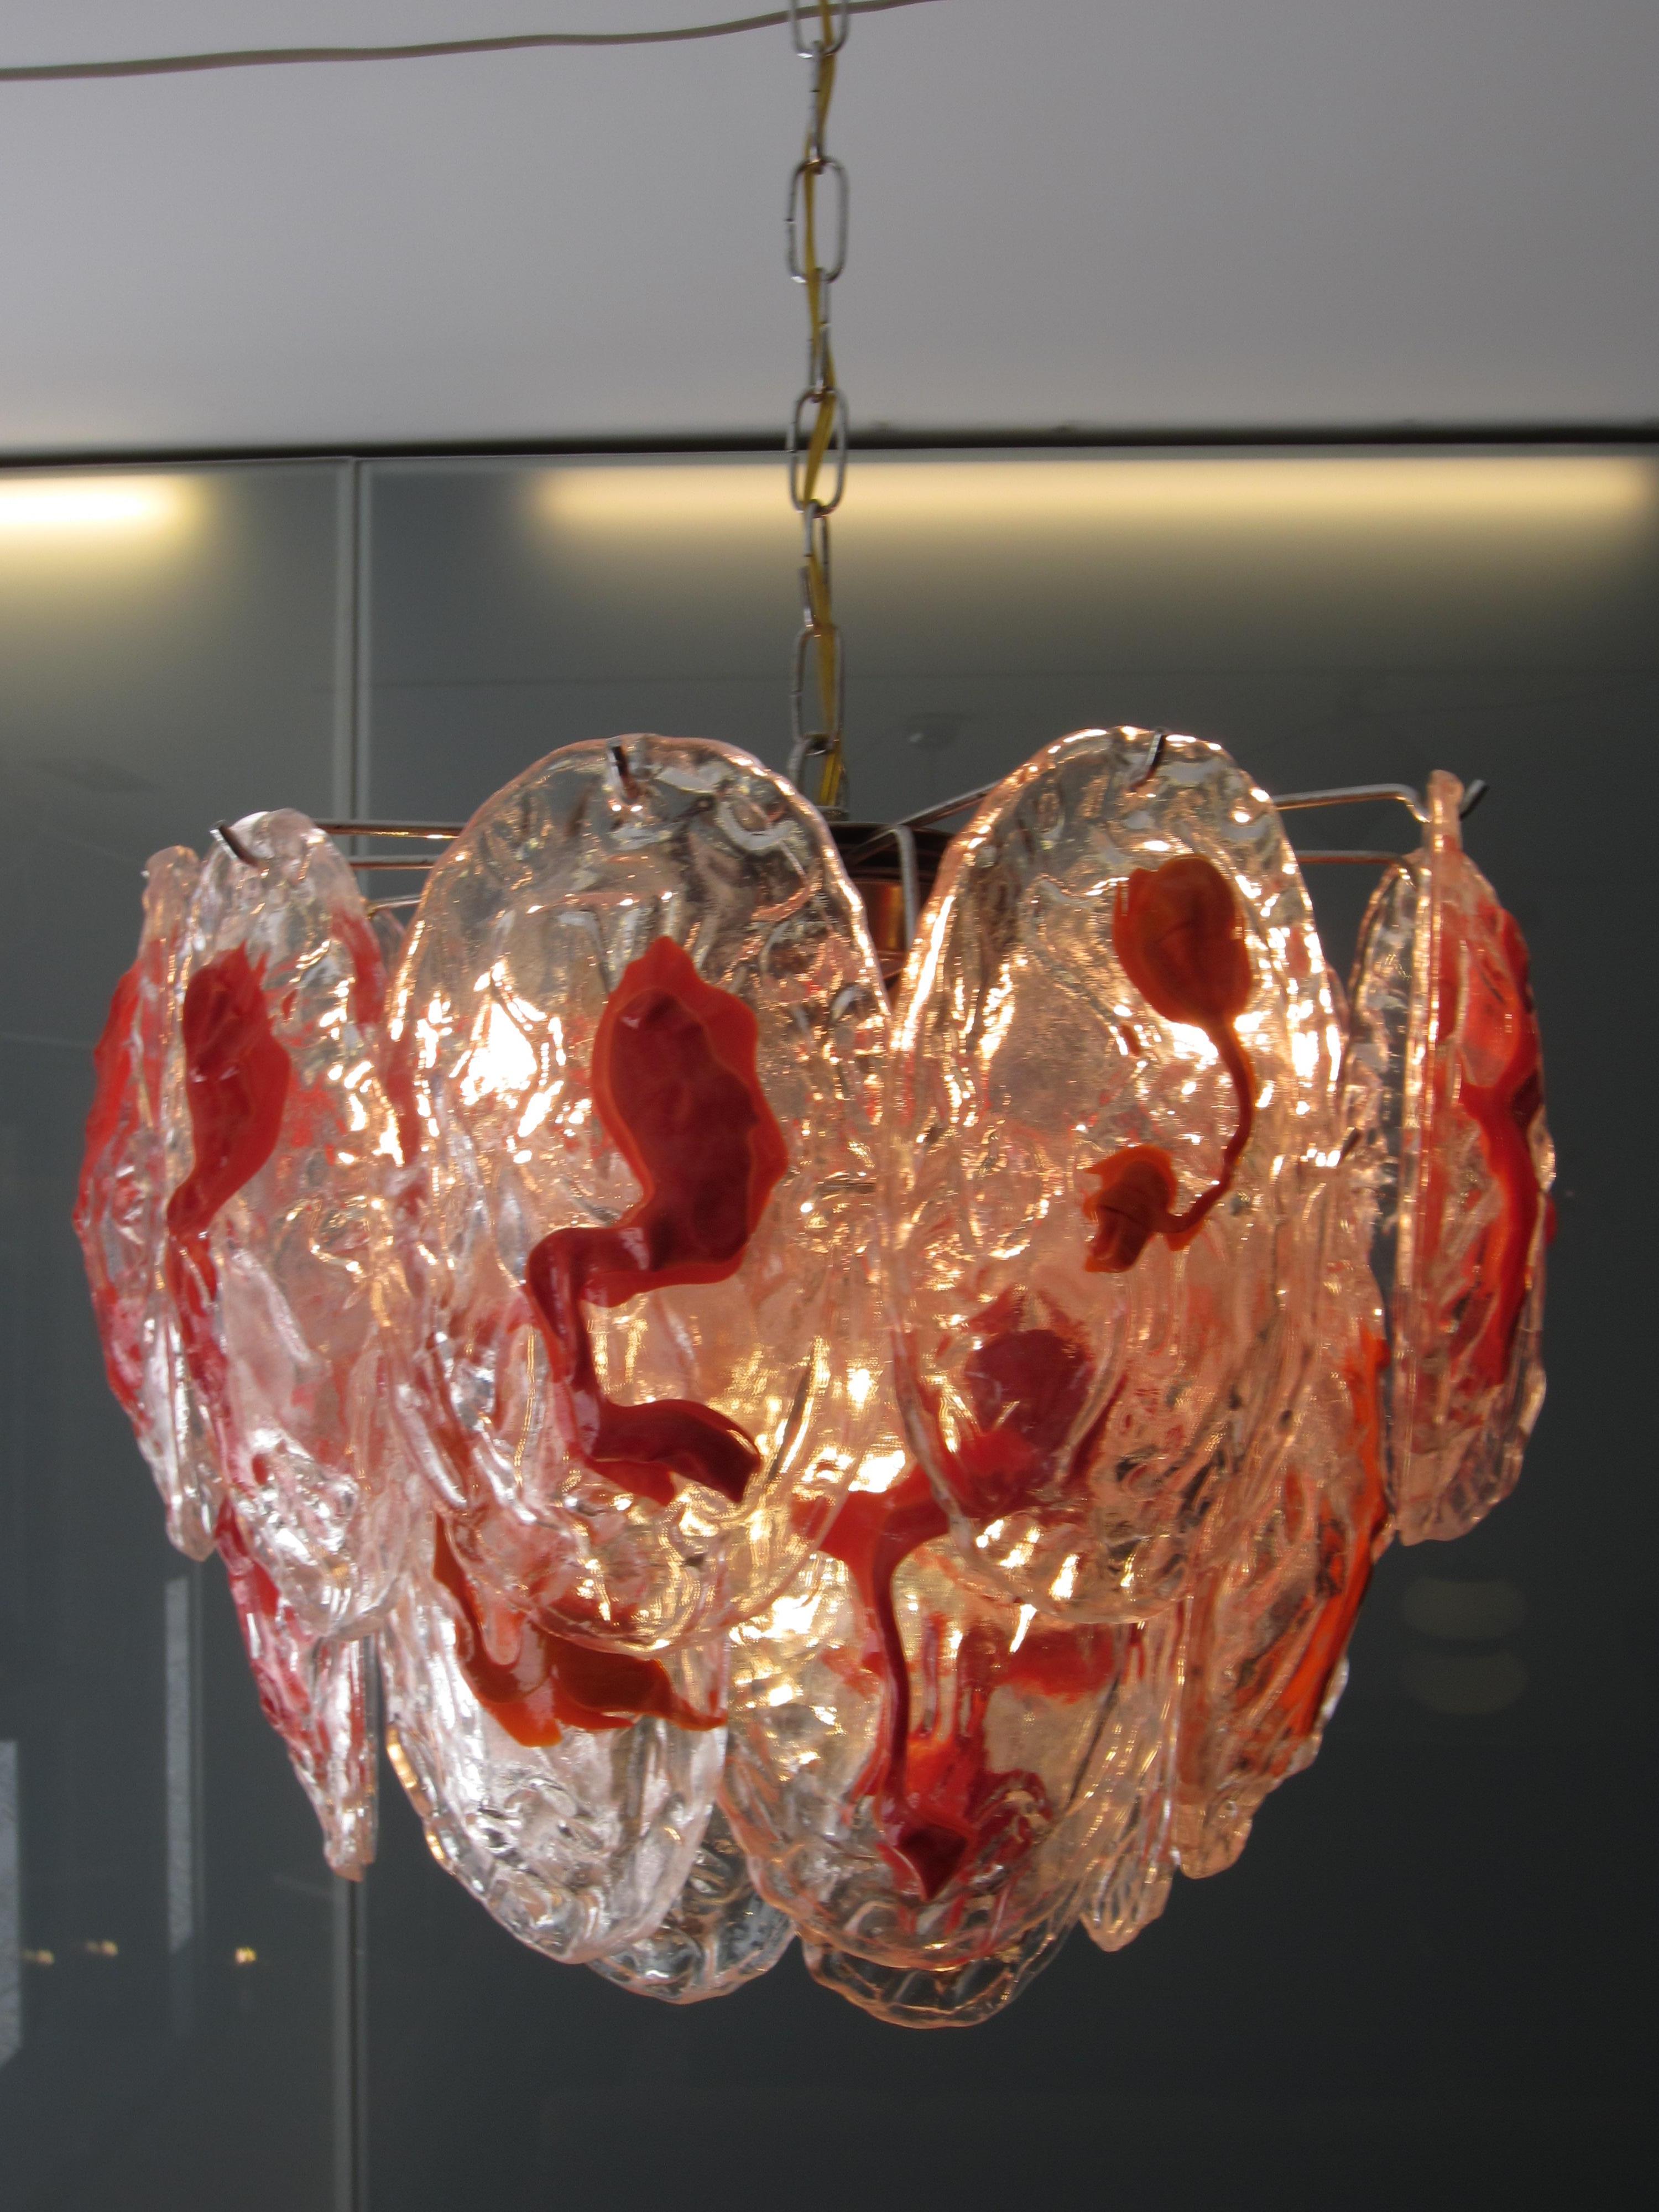 Hanging chandelier from the 1960s-1970s attributed to Mazzega, Italy.
5 lights, 24 glasses with decorations in molten coral red glass.
Glass in very good condition.